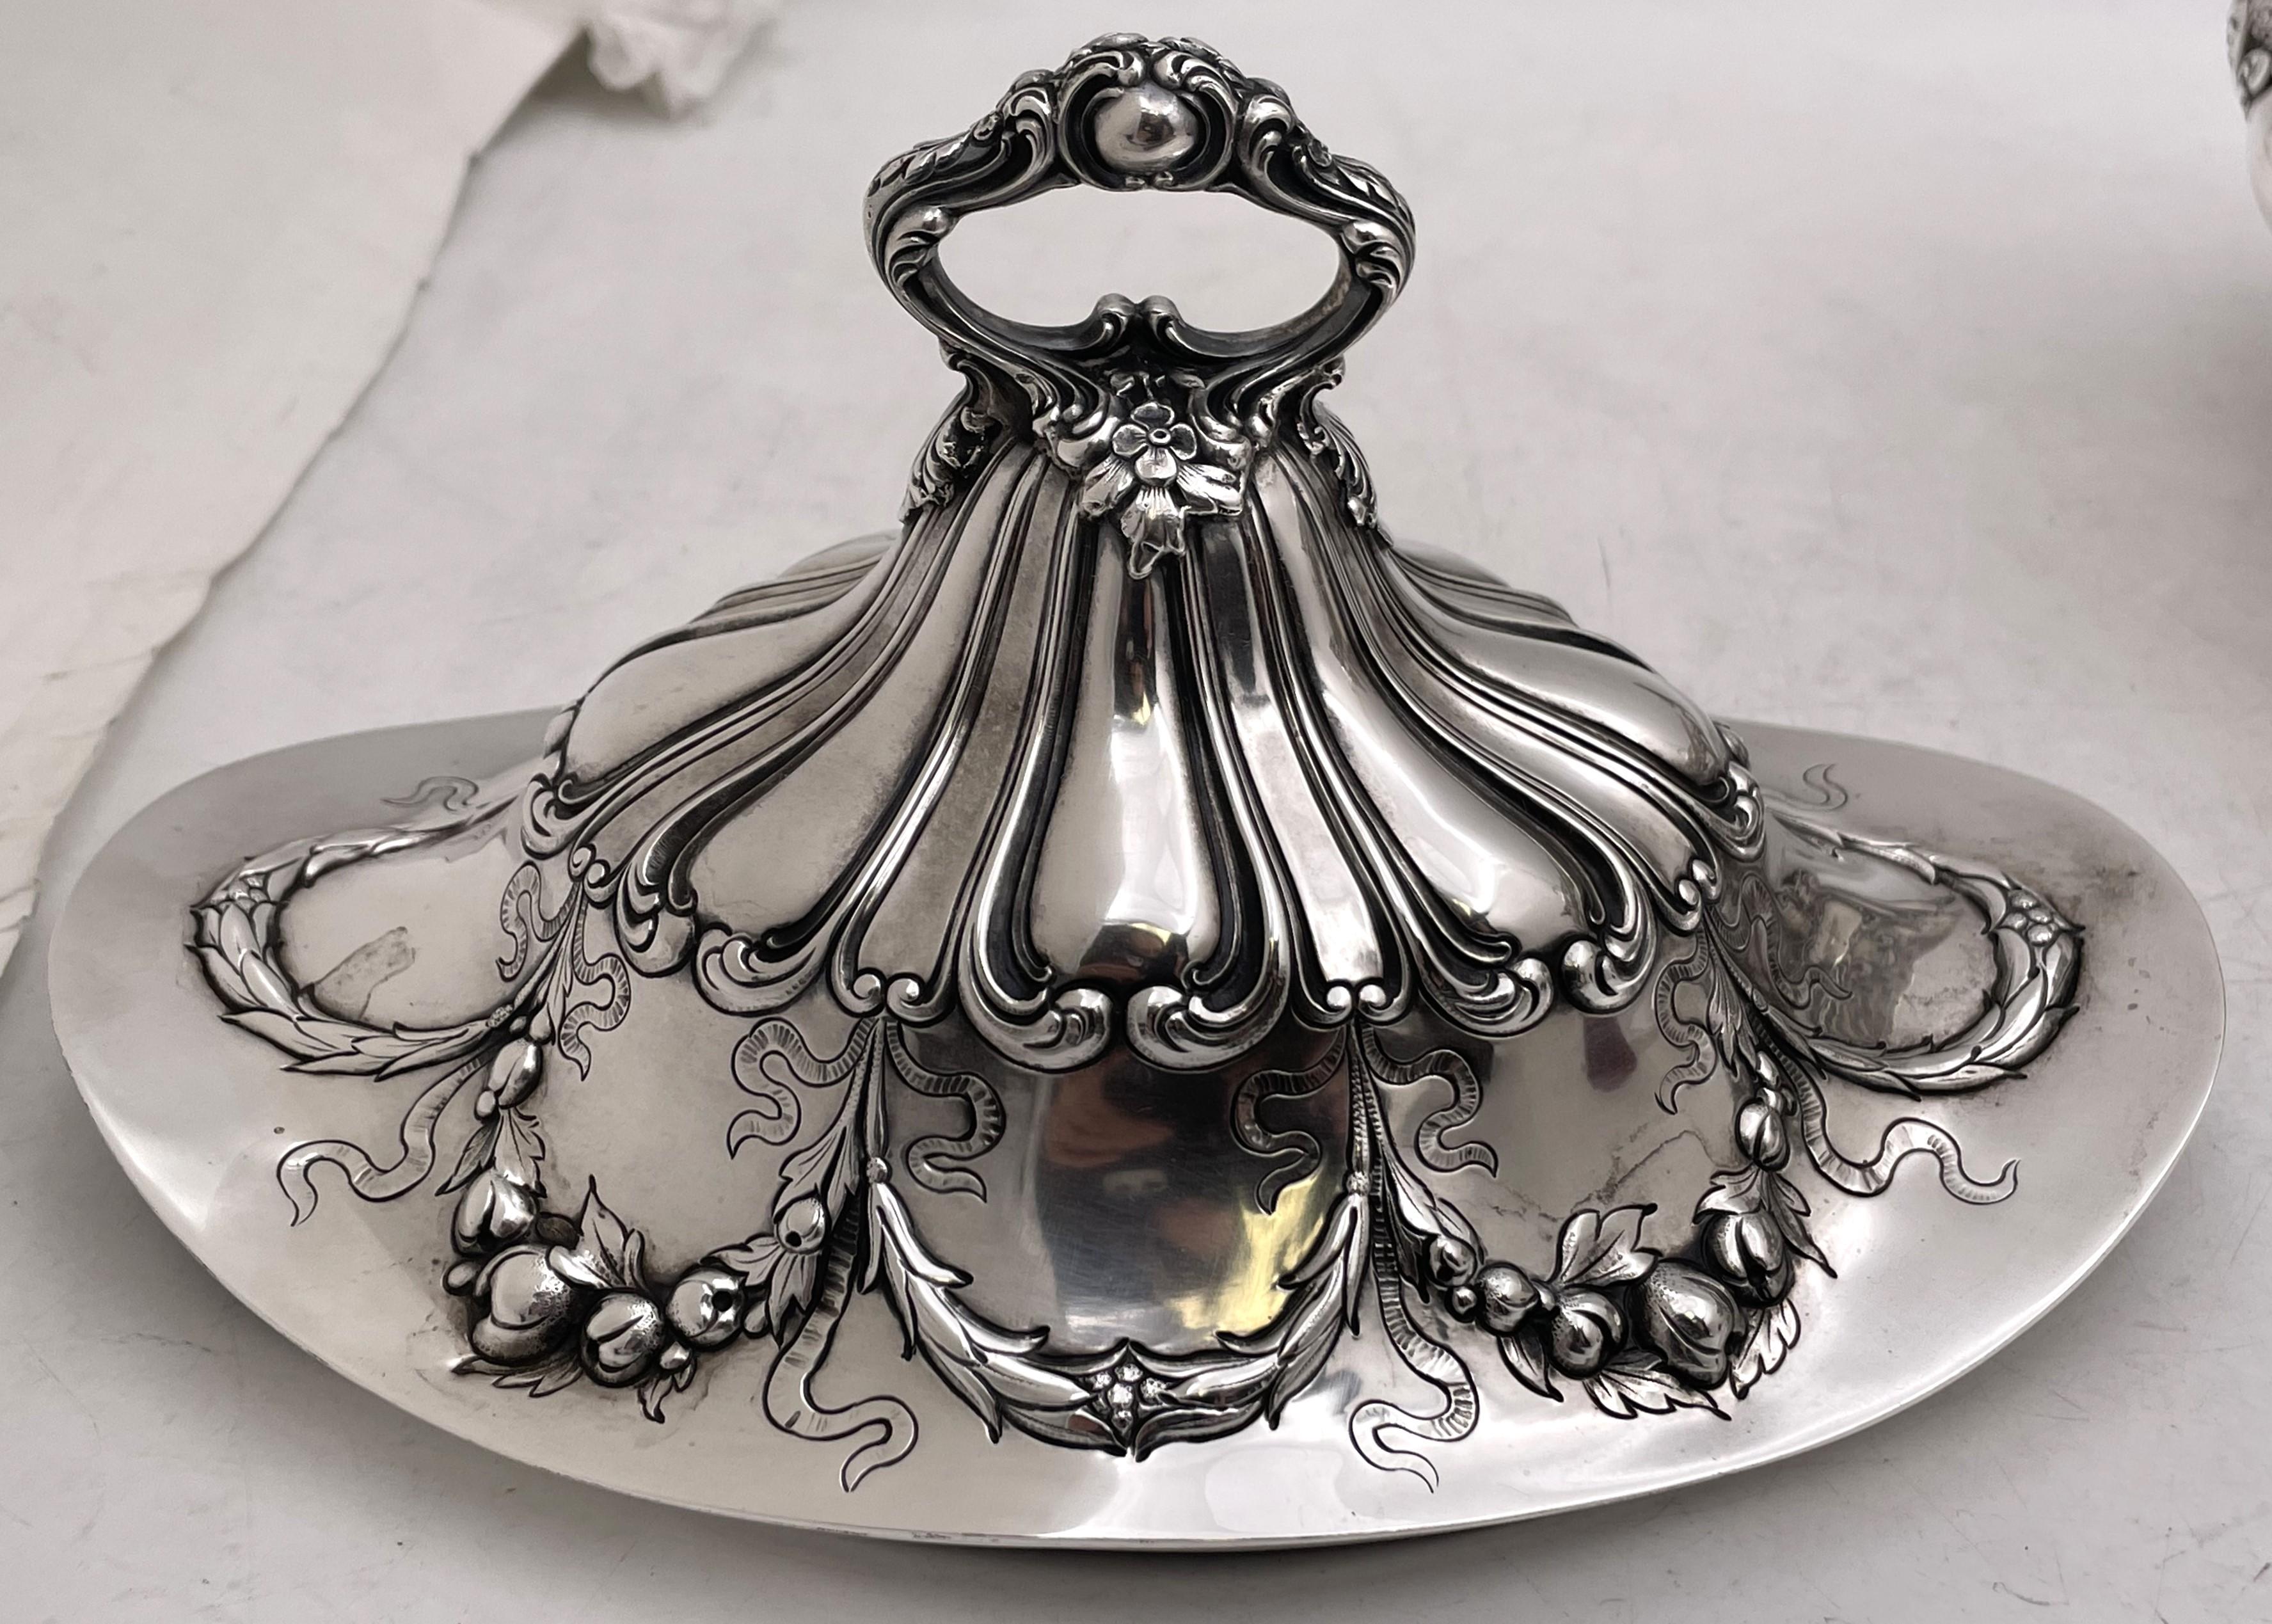 Gorham Chantilly Grande Pair of Sterling Silver 1900 Tureens Art Nouveau Style In Good Condition For Sale In New York, NY